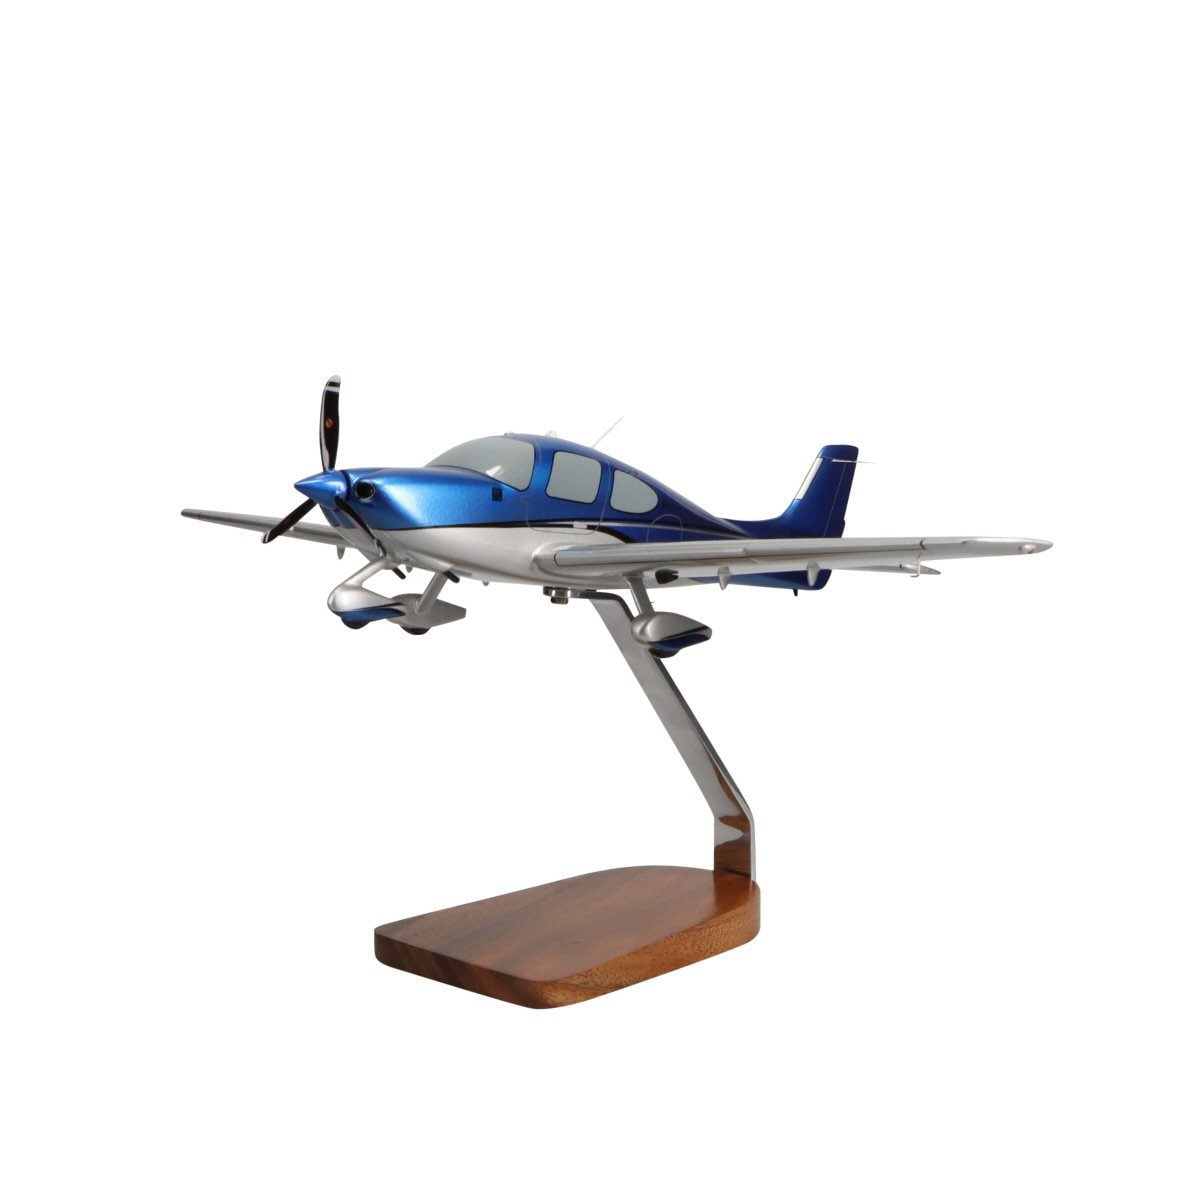 High Flying Models Cirrus SR22 Clear Canopy Limited Edition Large Mahogany Model